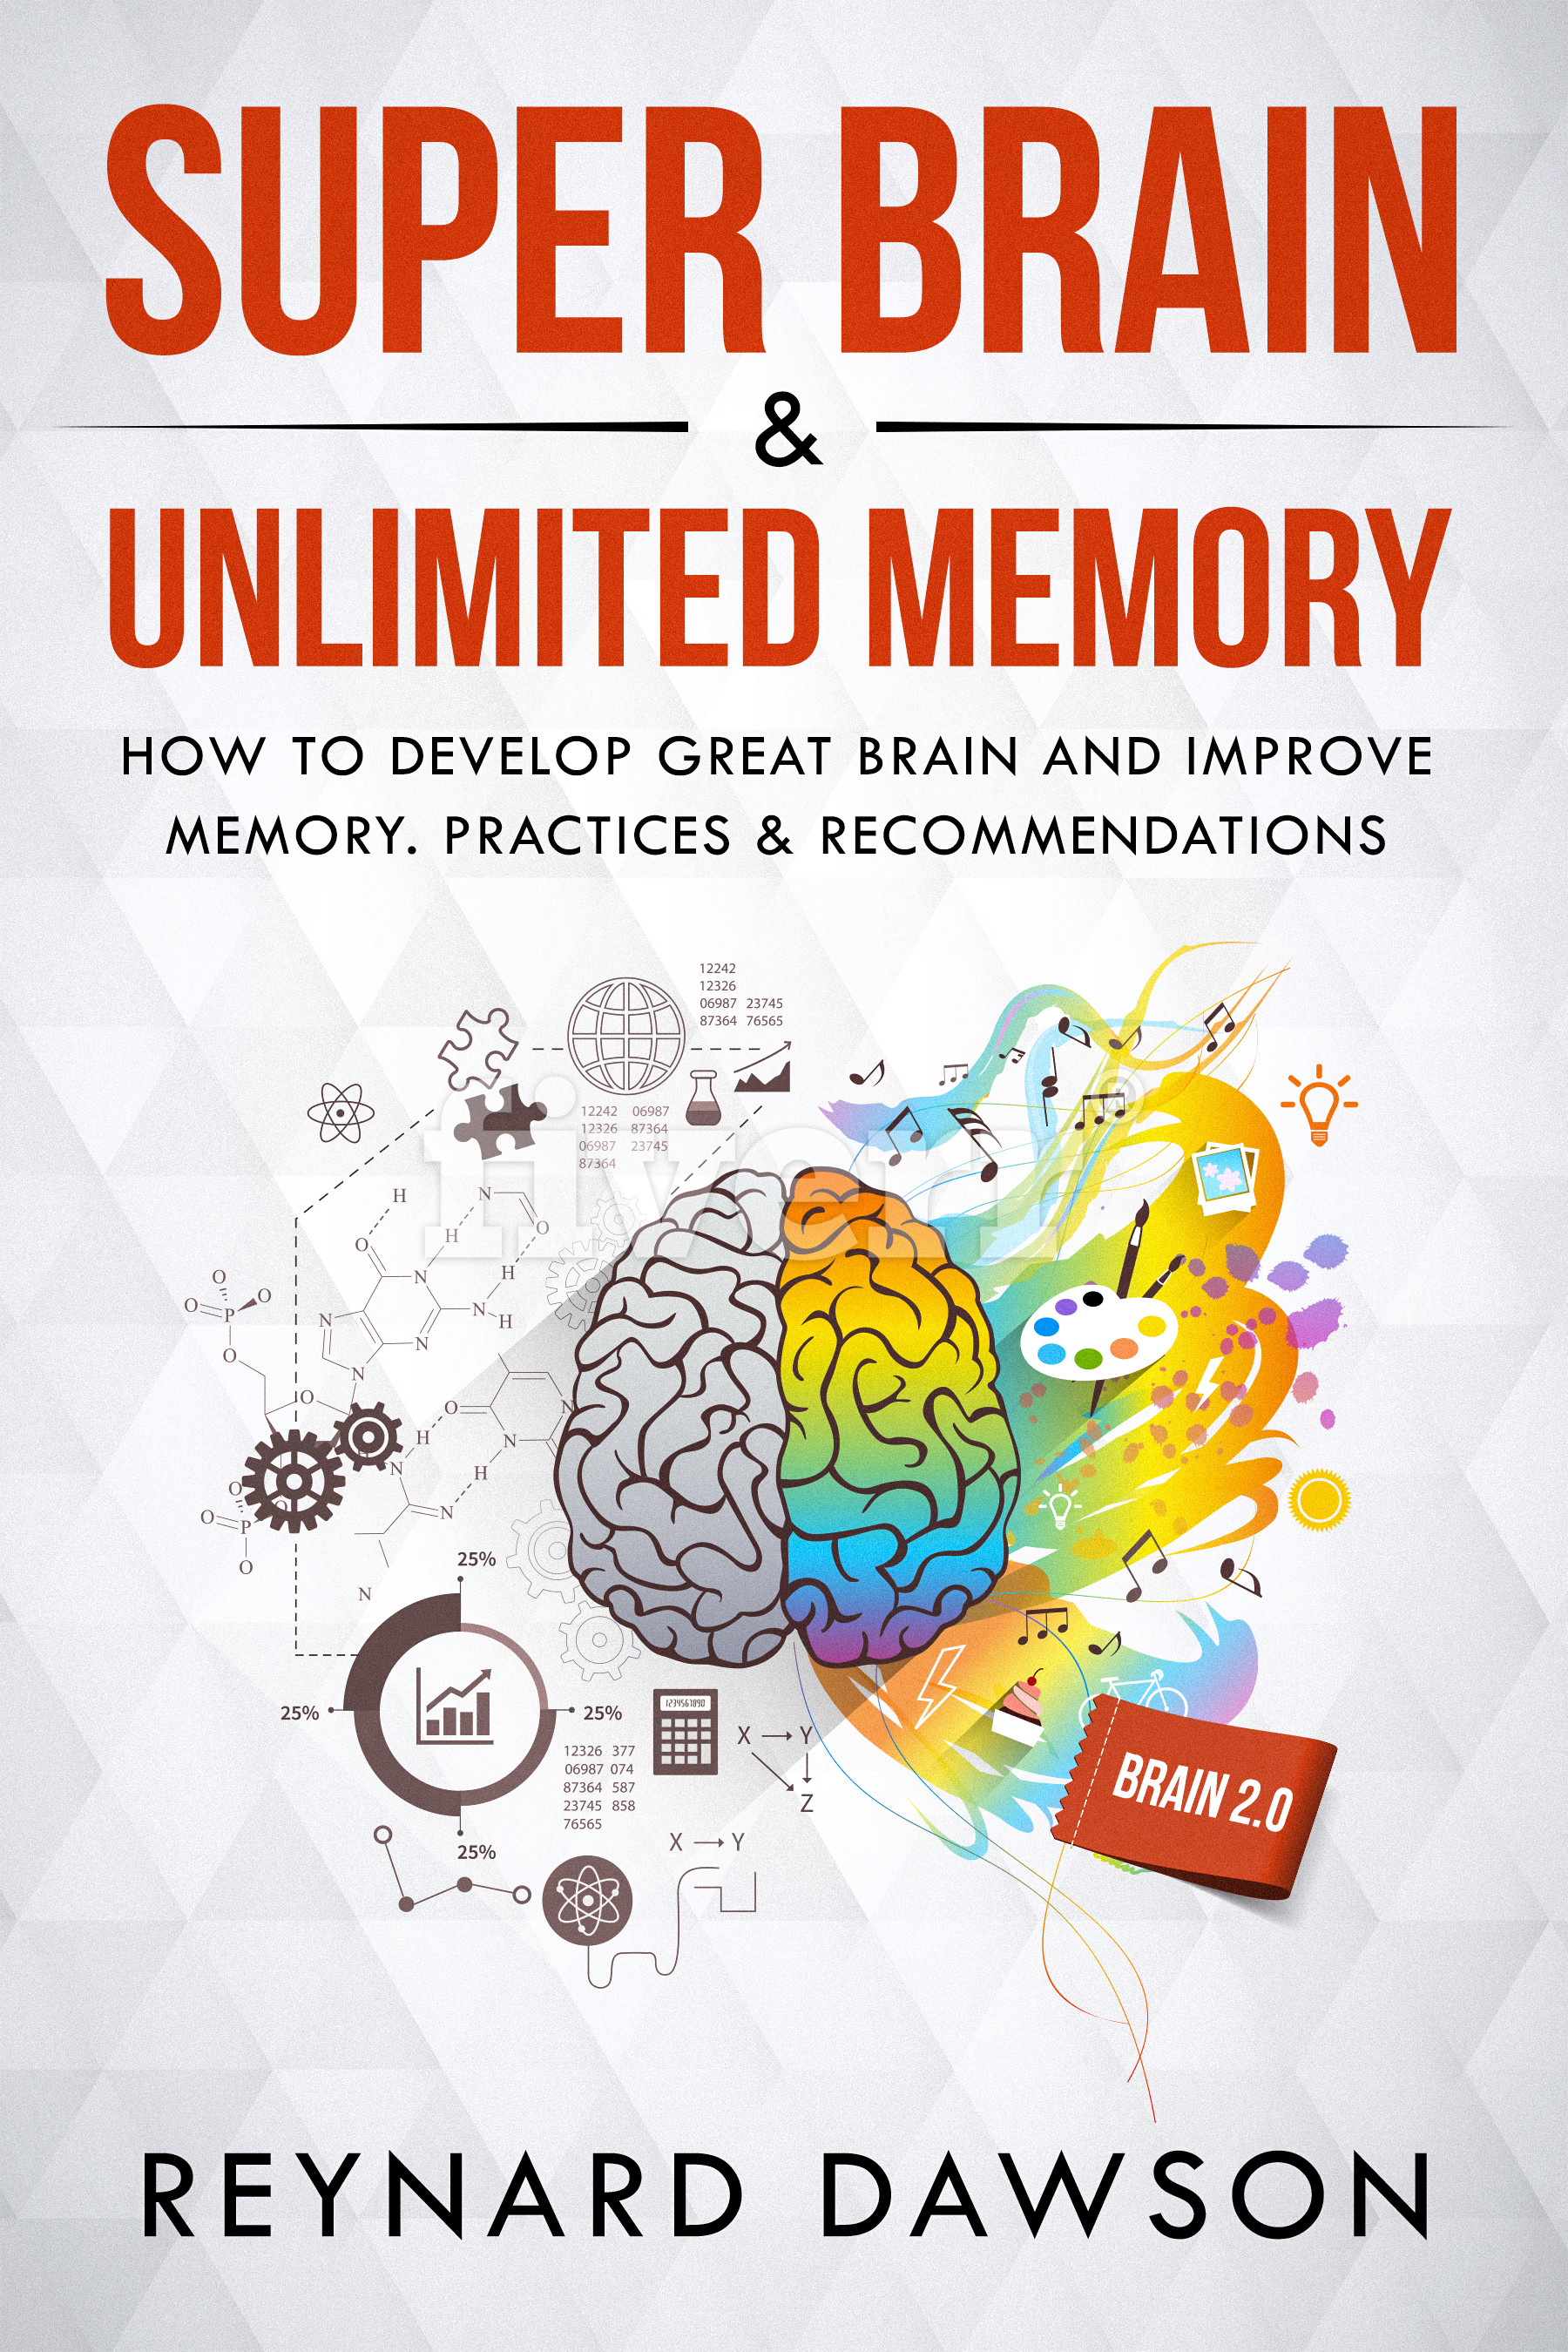 FREE: Super Brain & Unlimited Memory: How to Develop Great Brain and Improve Memory. Practices & Recommendations by Reynard Dawson